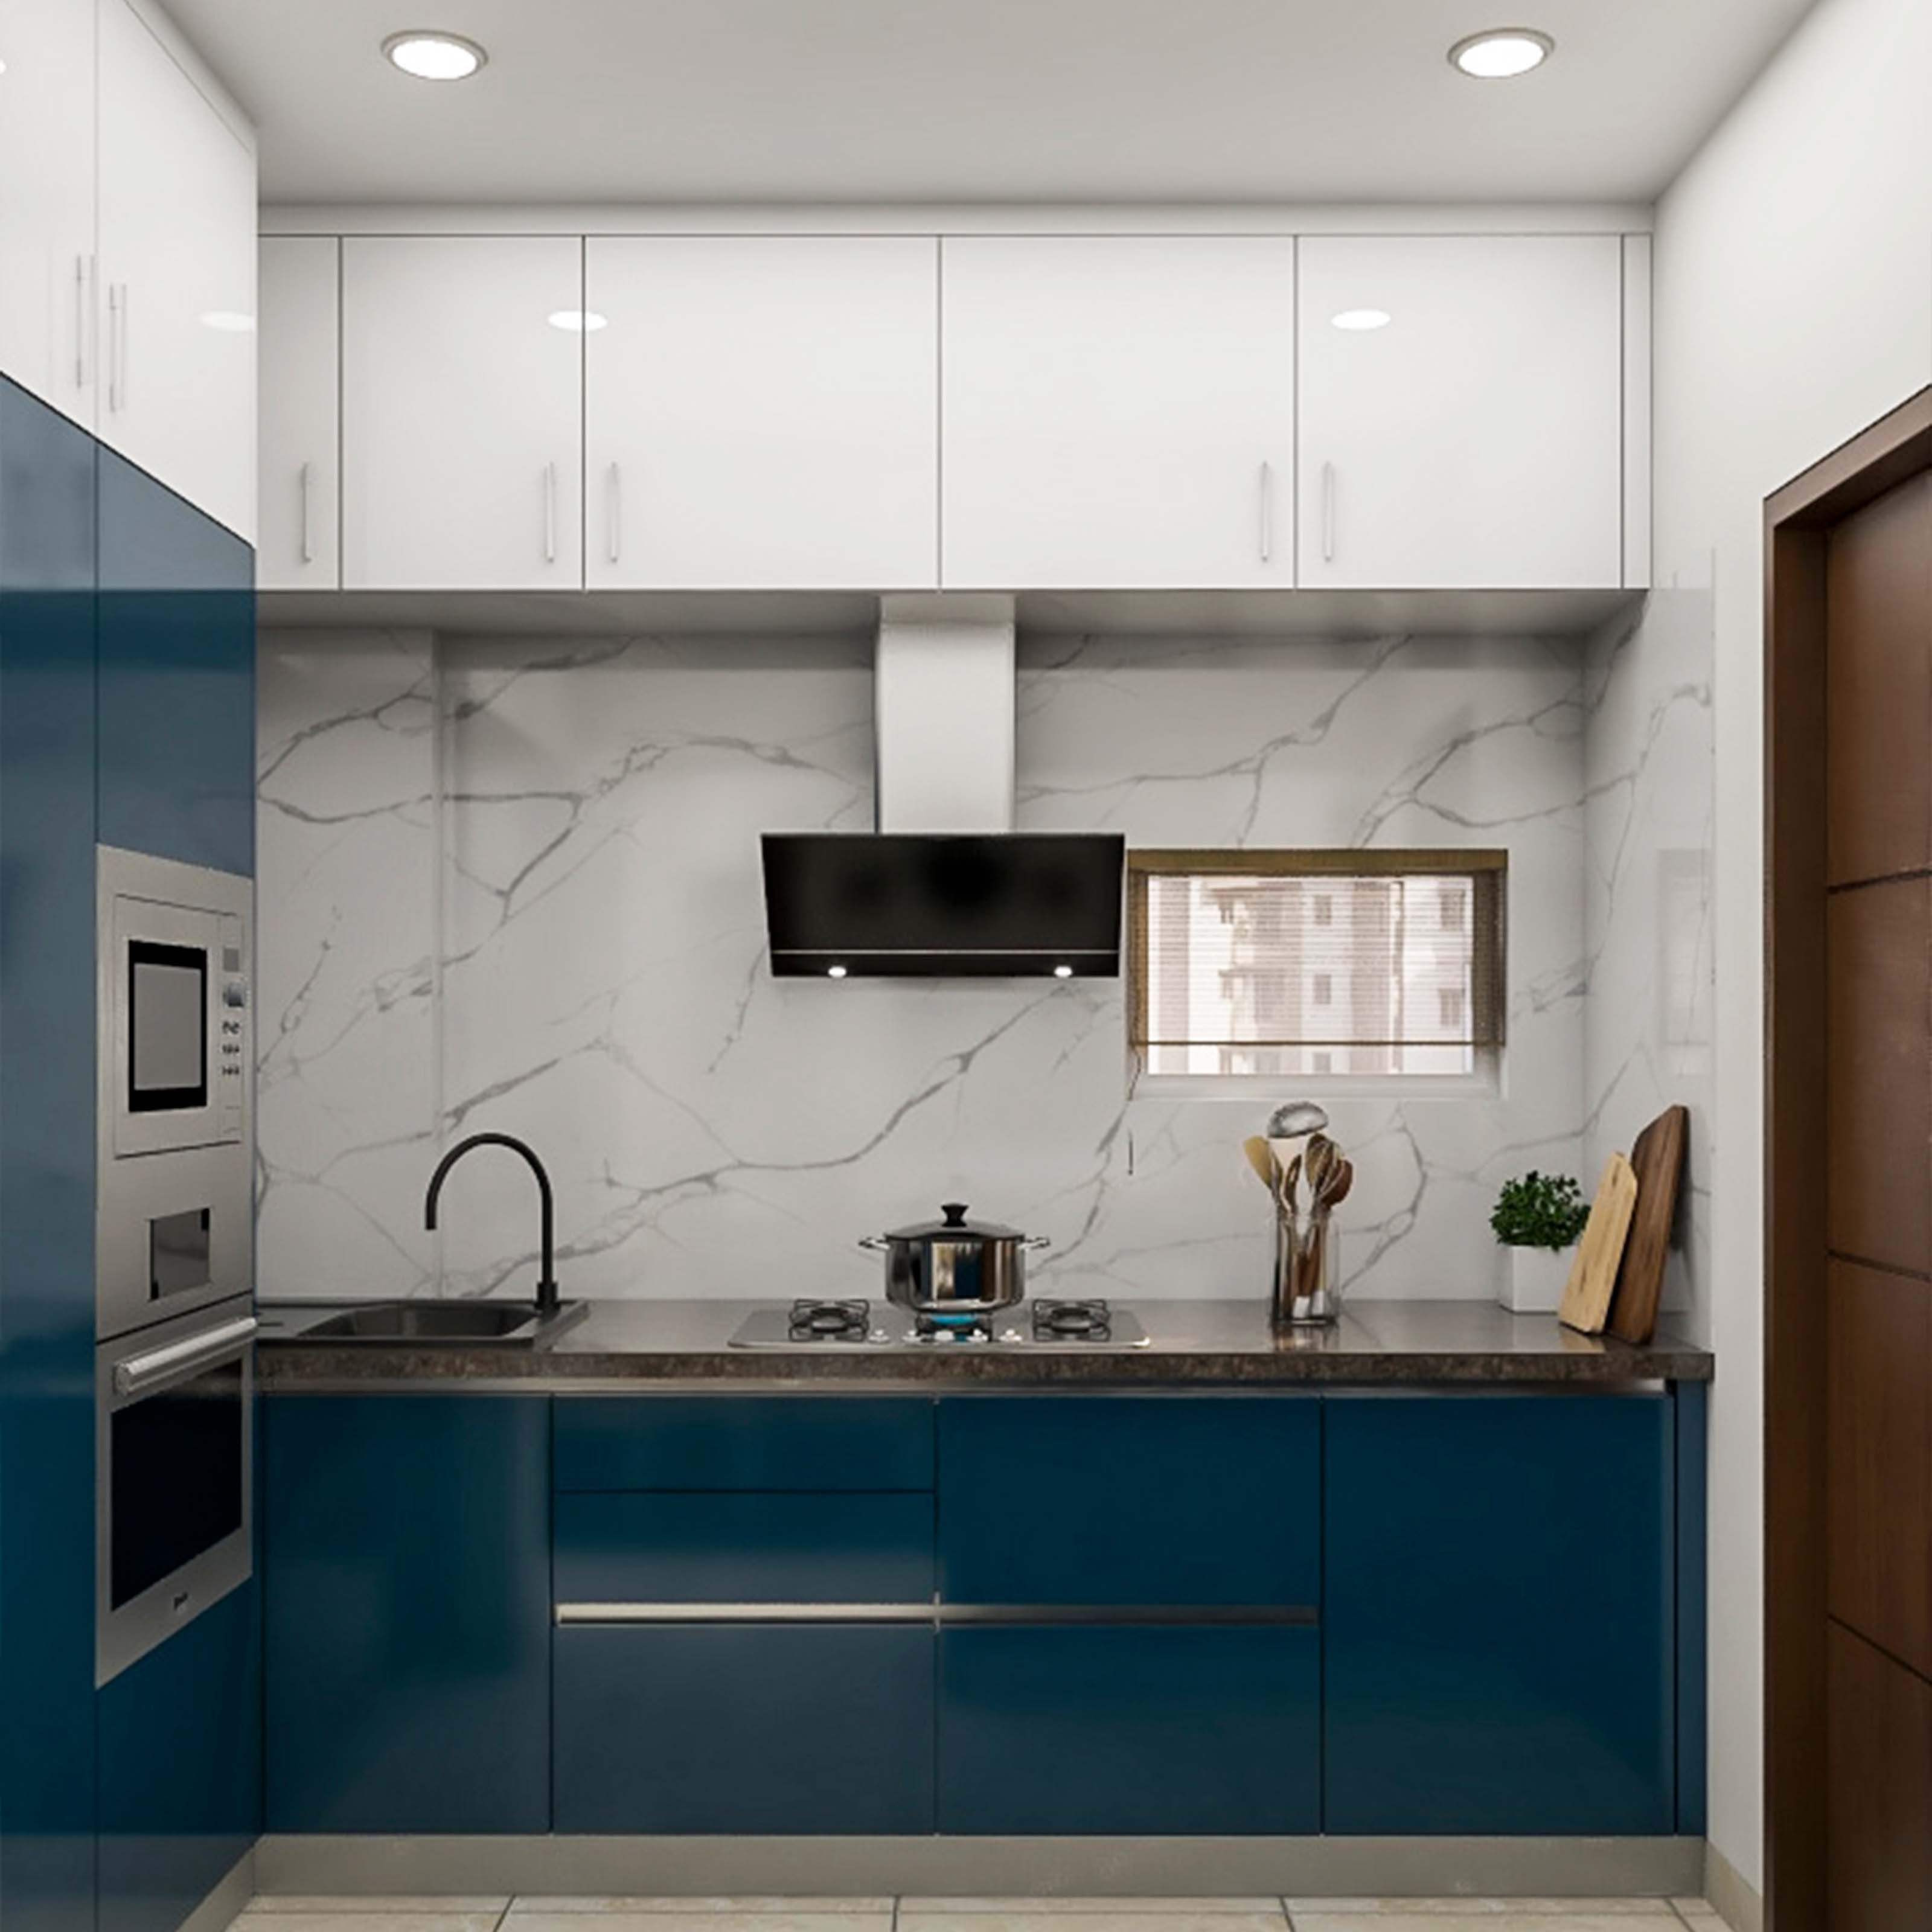 Contemporary L-Shaped Kitchen Design With Tall Appliance Unit